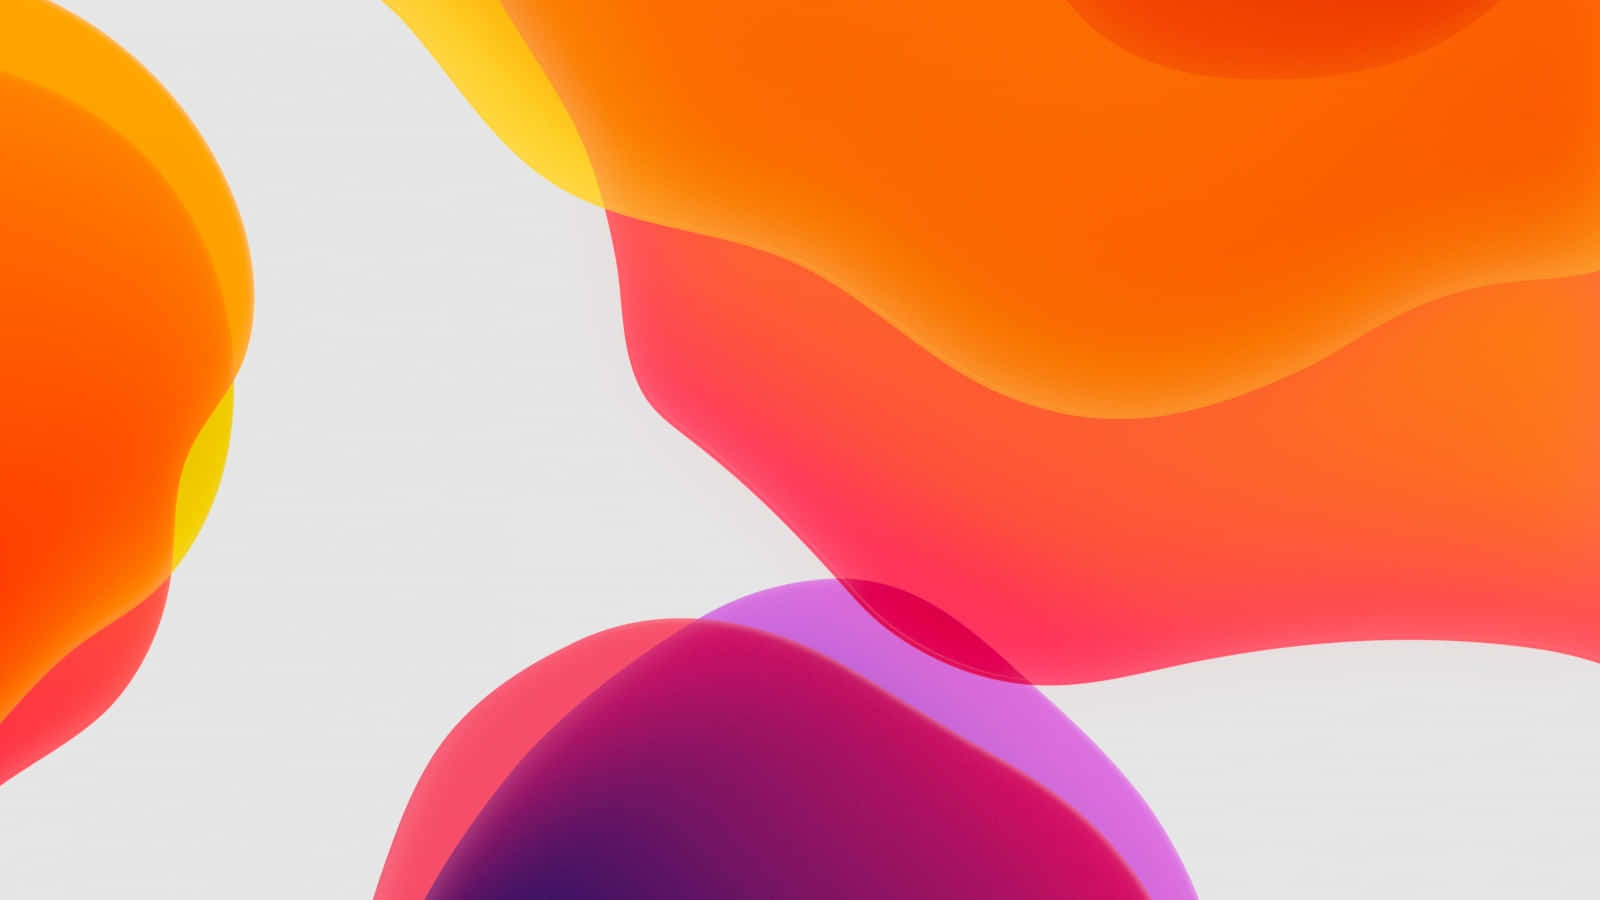 Abstract Abstract Background With Colorful Shapes Wallpaper